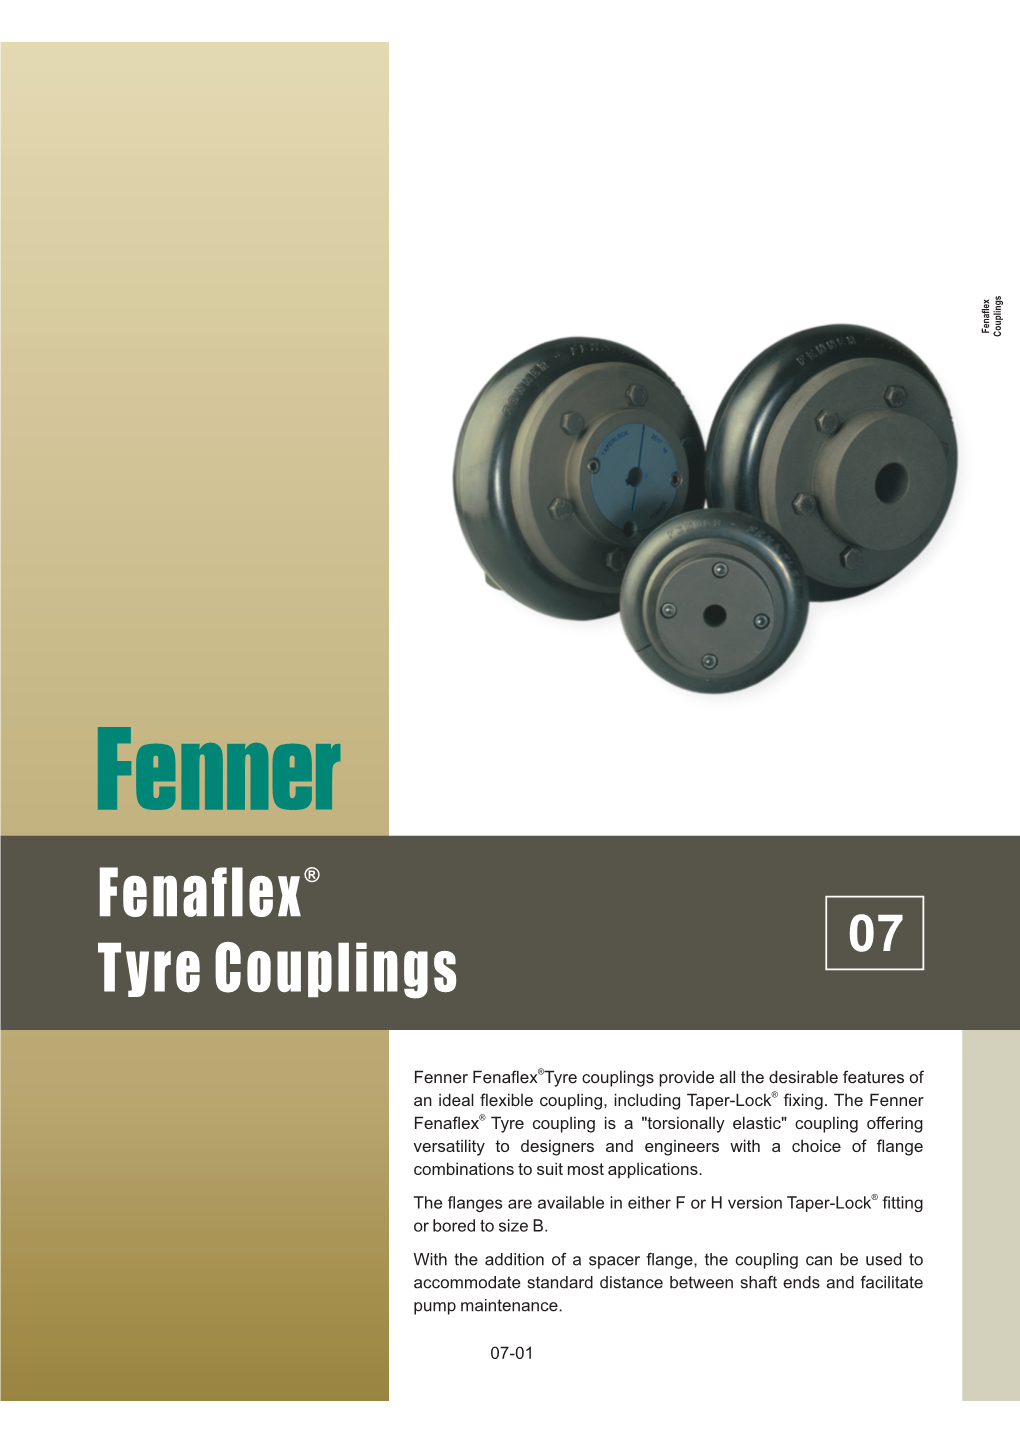 07-01 Fenner Fenaflex Tyre Couplings Provide All the Desirable Features Of